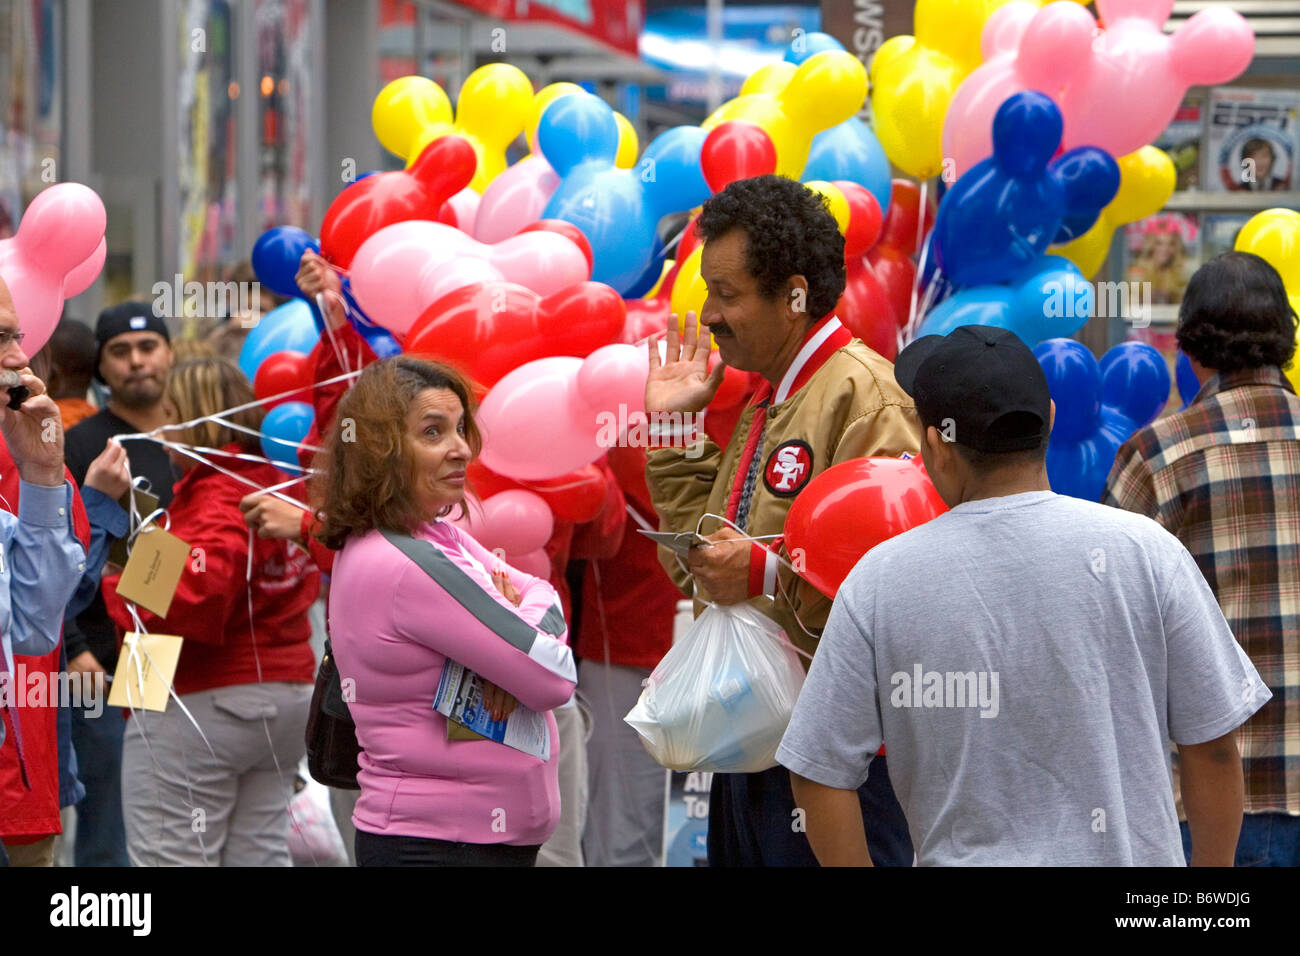 Promotional Disney balloons being handed out in Times Square Manhattan New York City New York USA Stock Photo